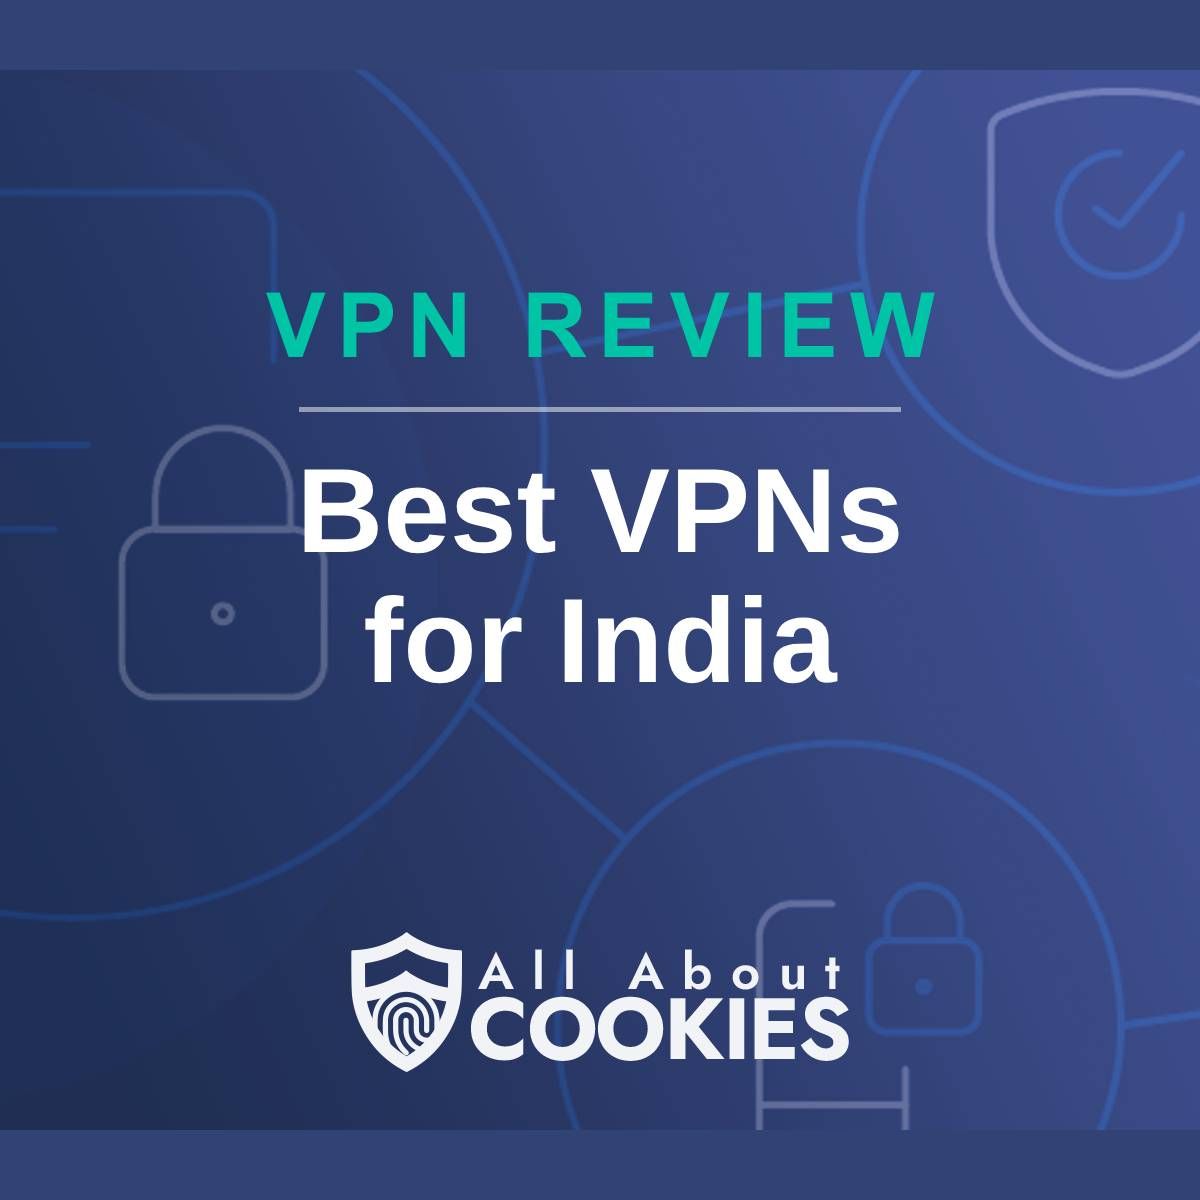 A blue background with images of locks and shields with the text &quot;VPN Review AAC | Best VPNs for India&quot; and the All About Cookies logo. 